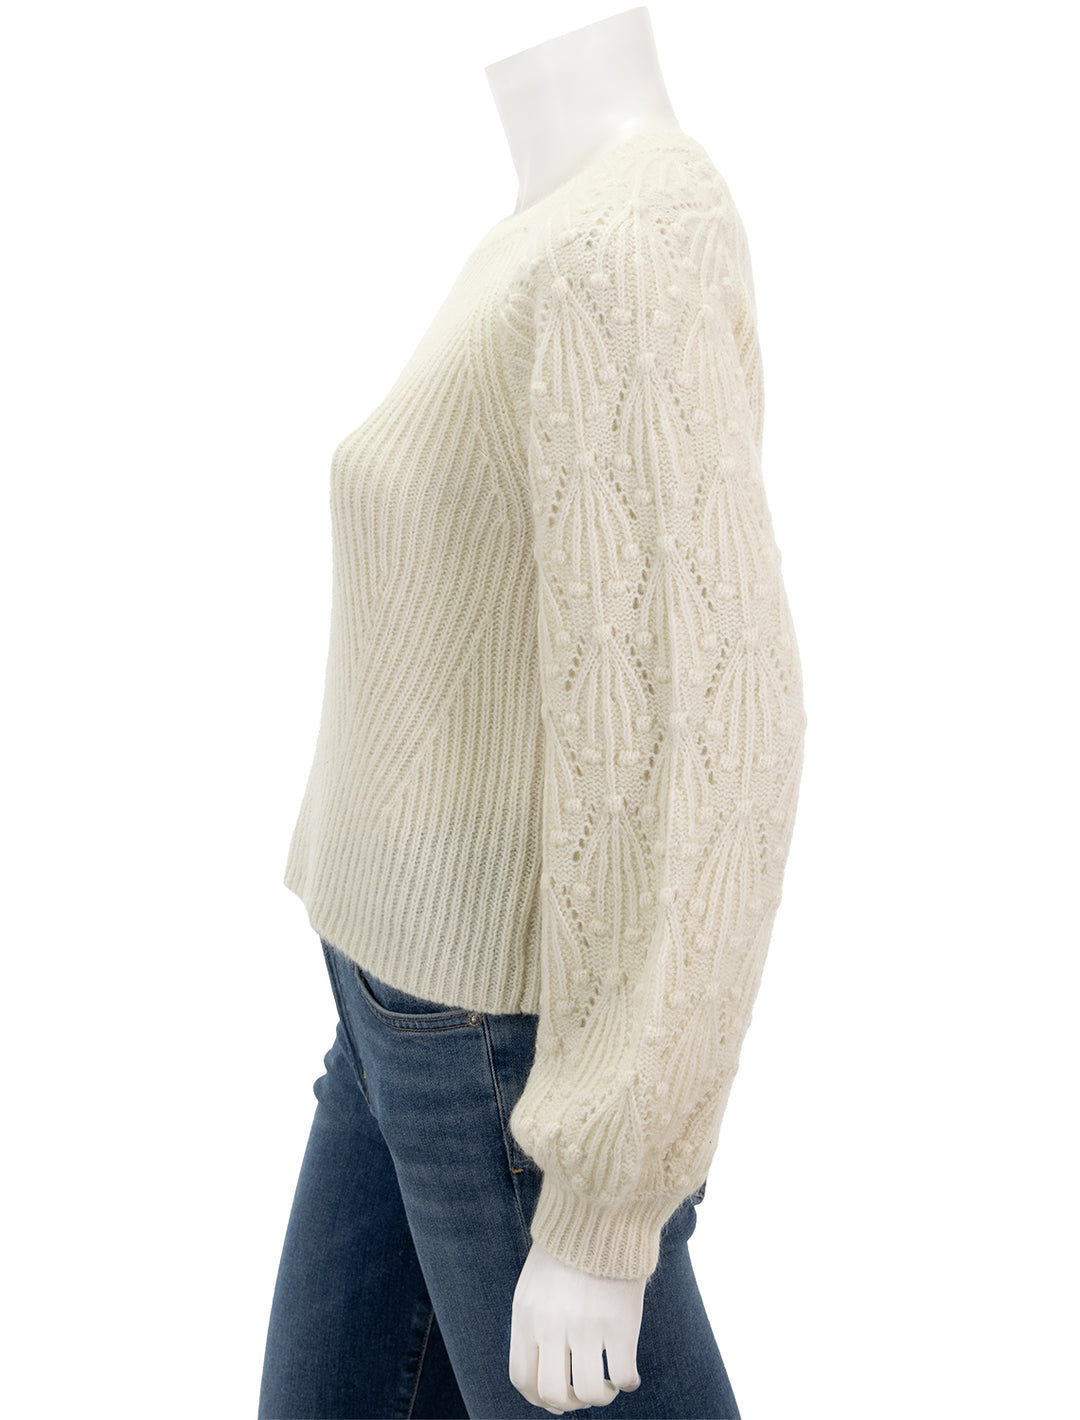 Side view of Splendid's rayne sweater in snow.